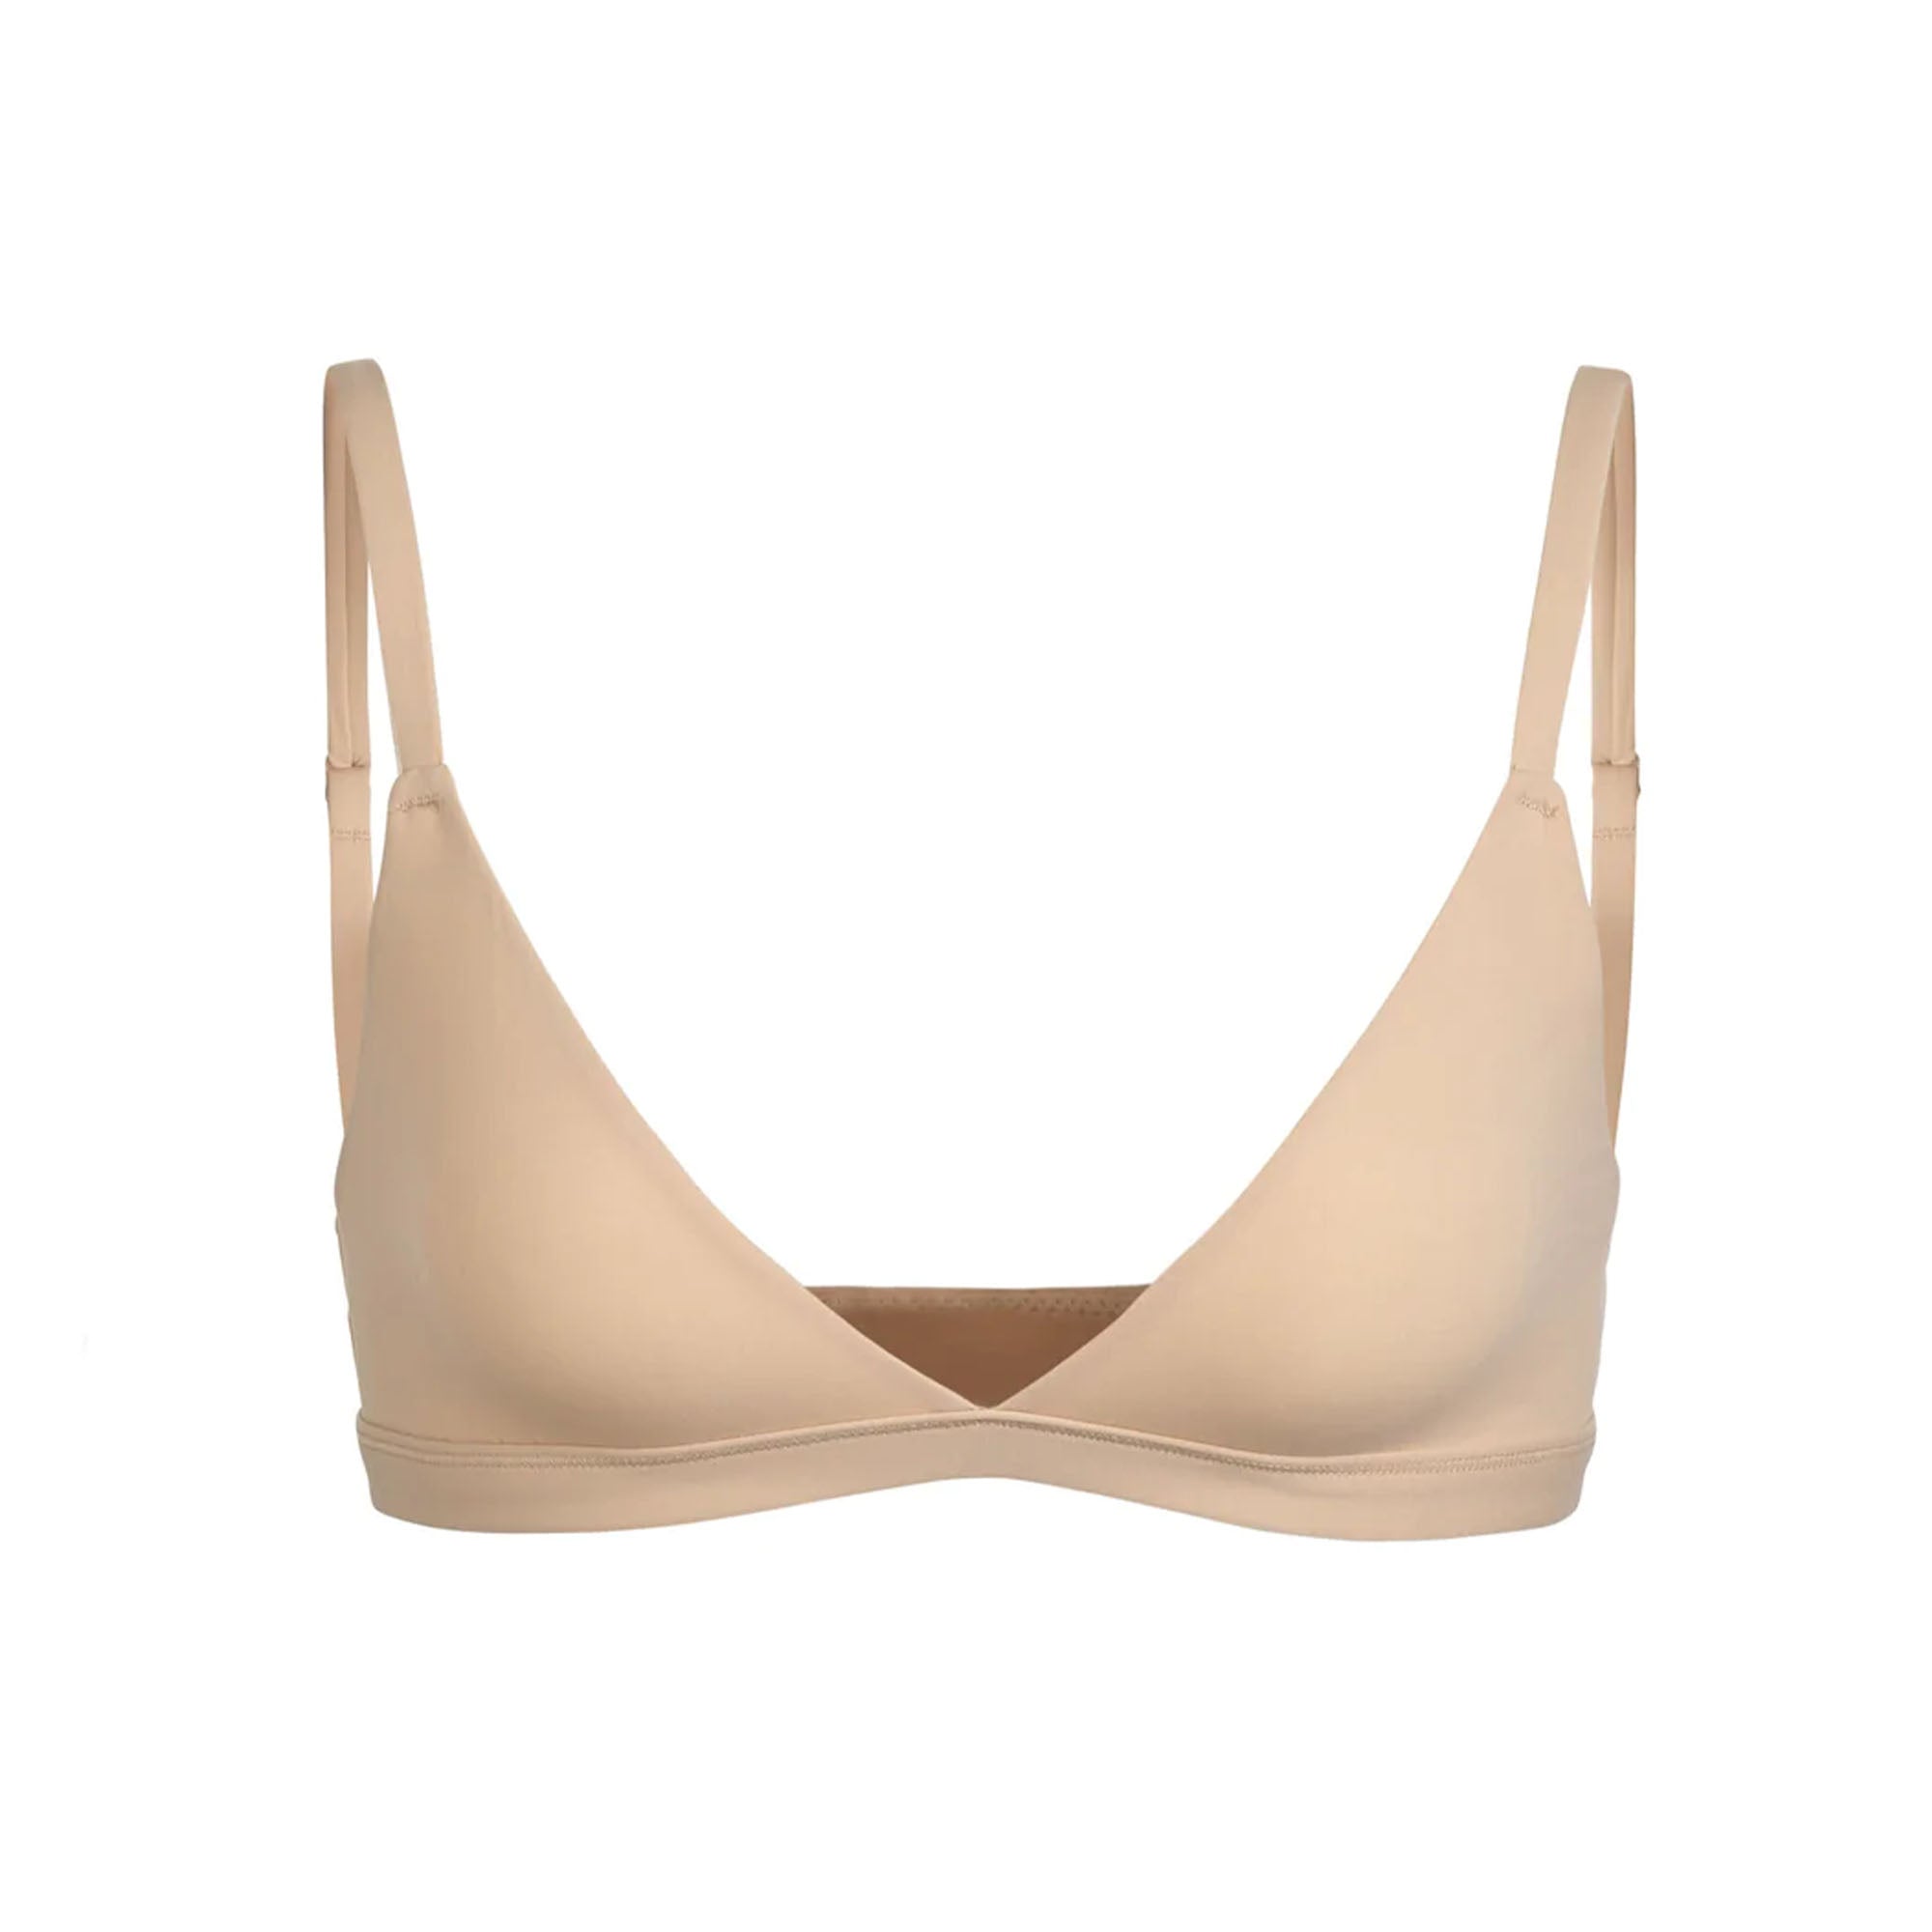 FITS EVERYBODY TRIANGLE BRALETTE | CLAY